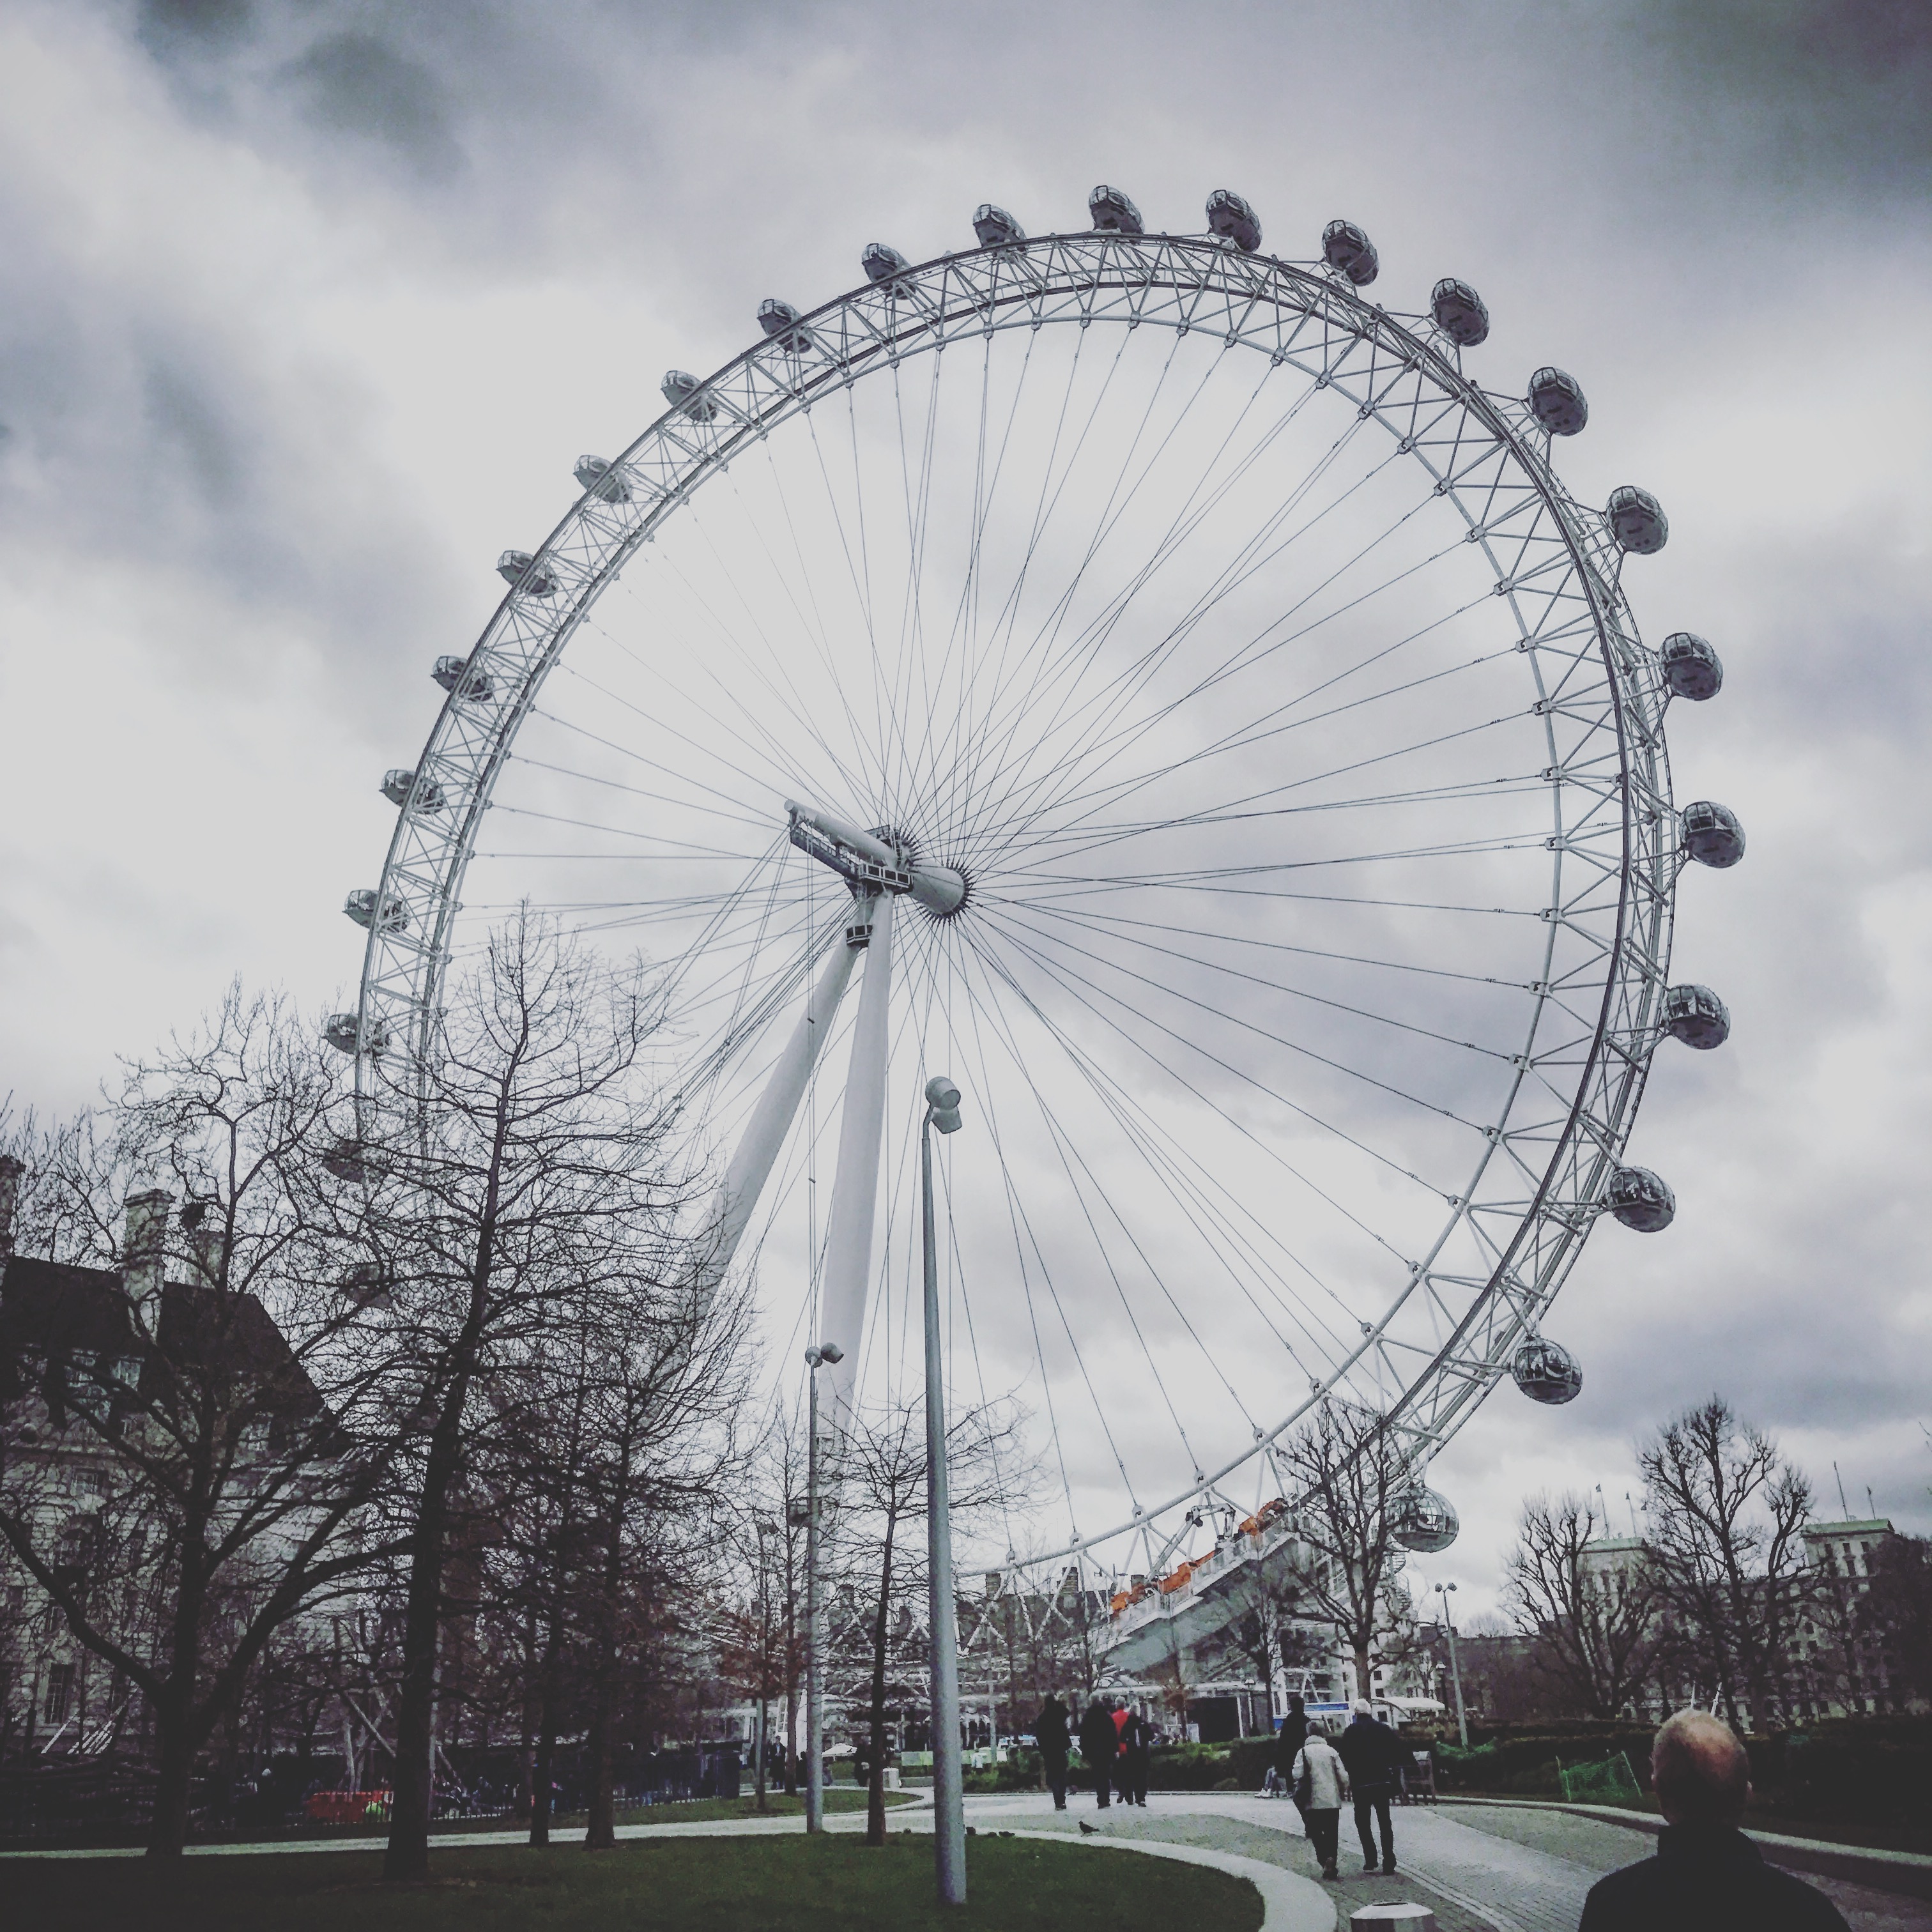 Free things to do in London - take a walk down to the Embankment to see views of the London Eye